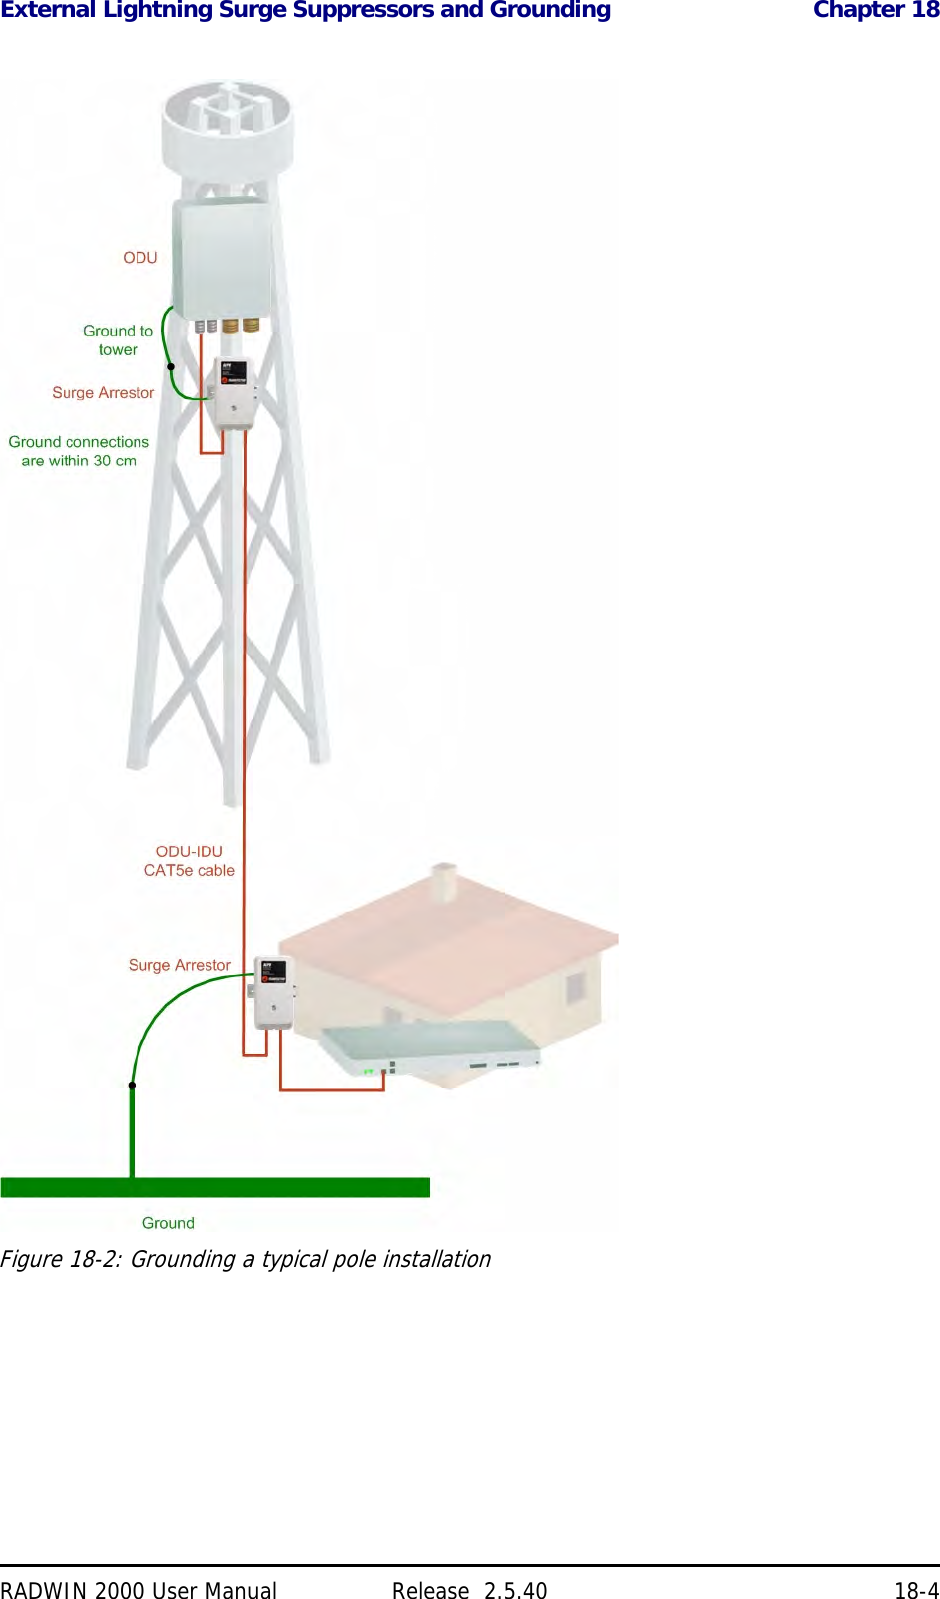 External Lightning Surge Suppressors and Grounding Chapter 18RADWIN 2000 User Manual Release  2.5.40 18-4Figure 18-2: Grounding a typical pole installation